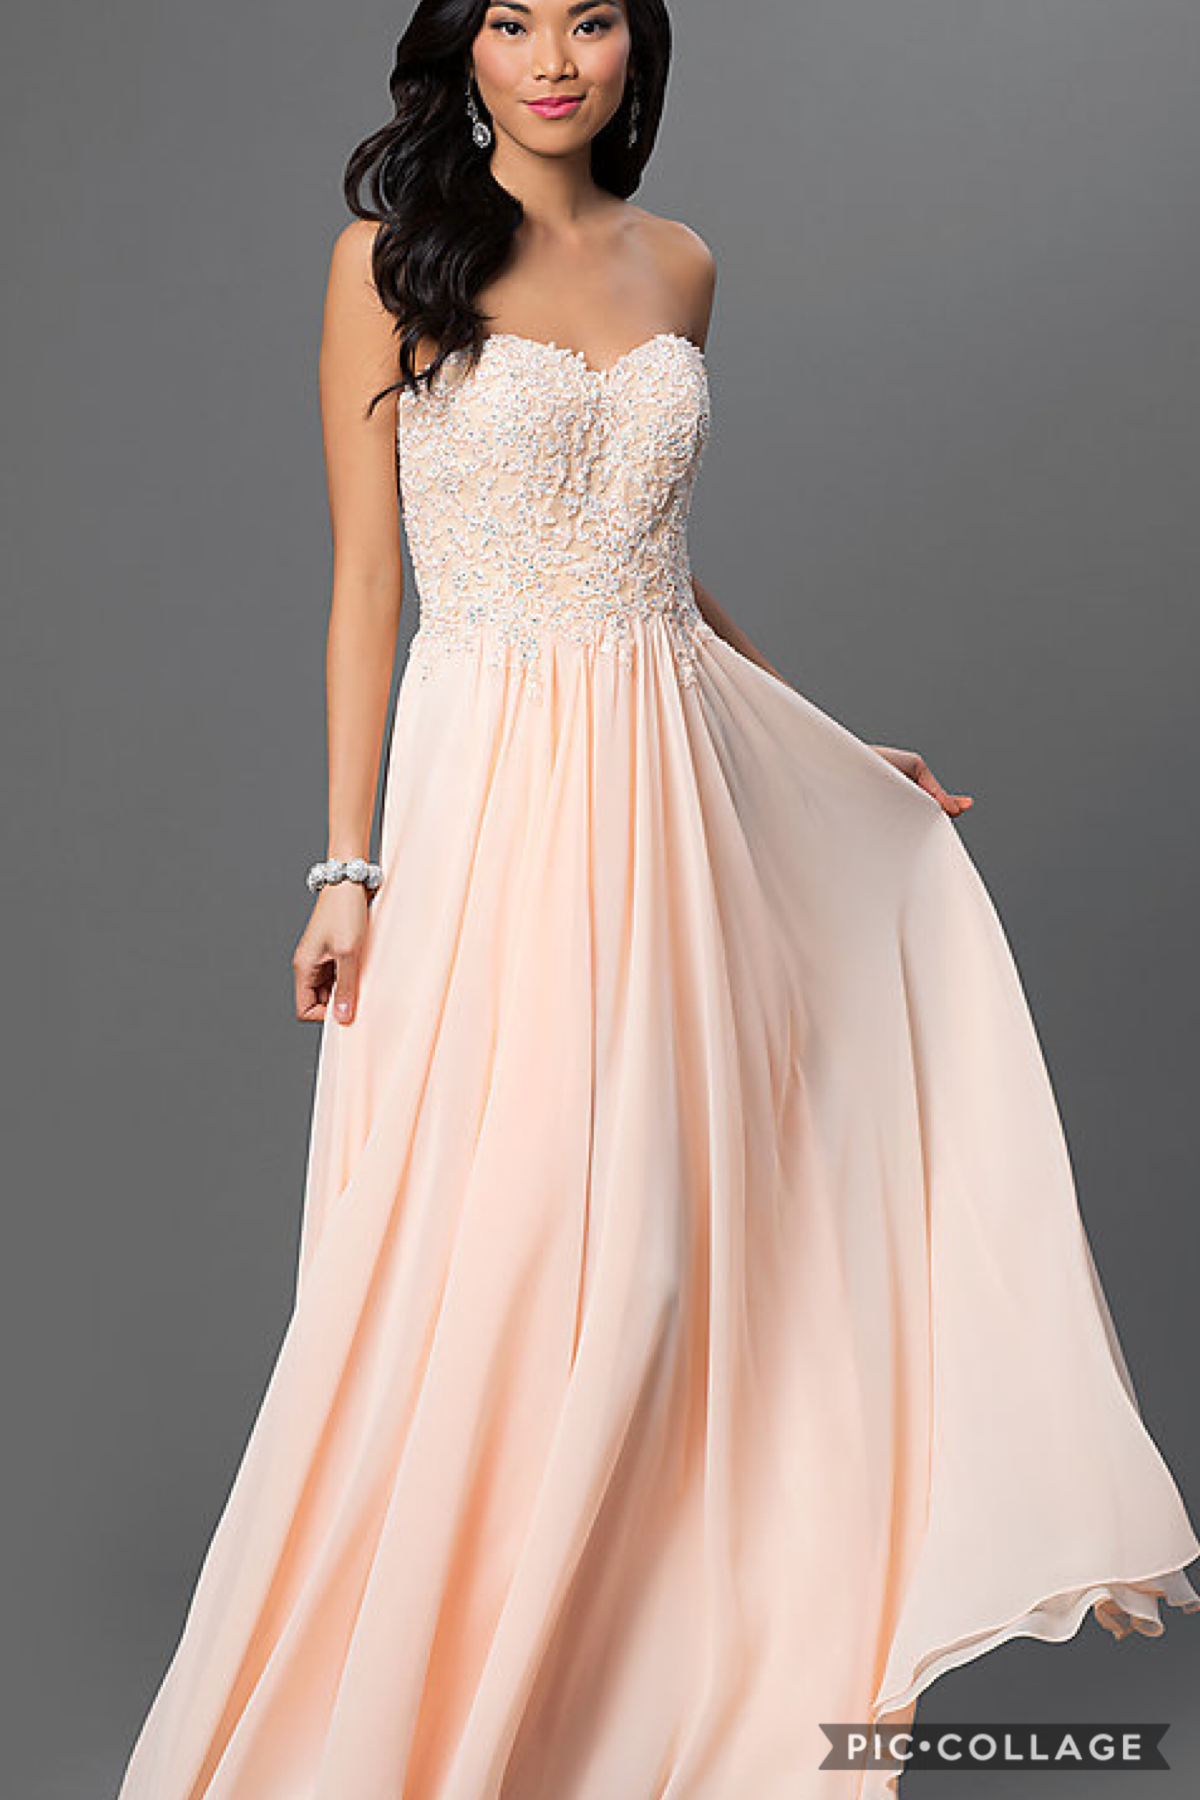 I found this beautiful prom dress! It’s simple but it’s beautiful!:)